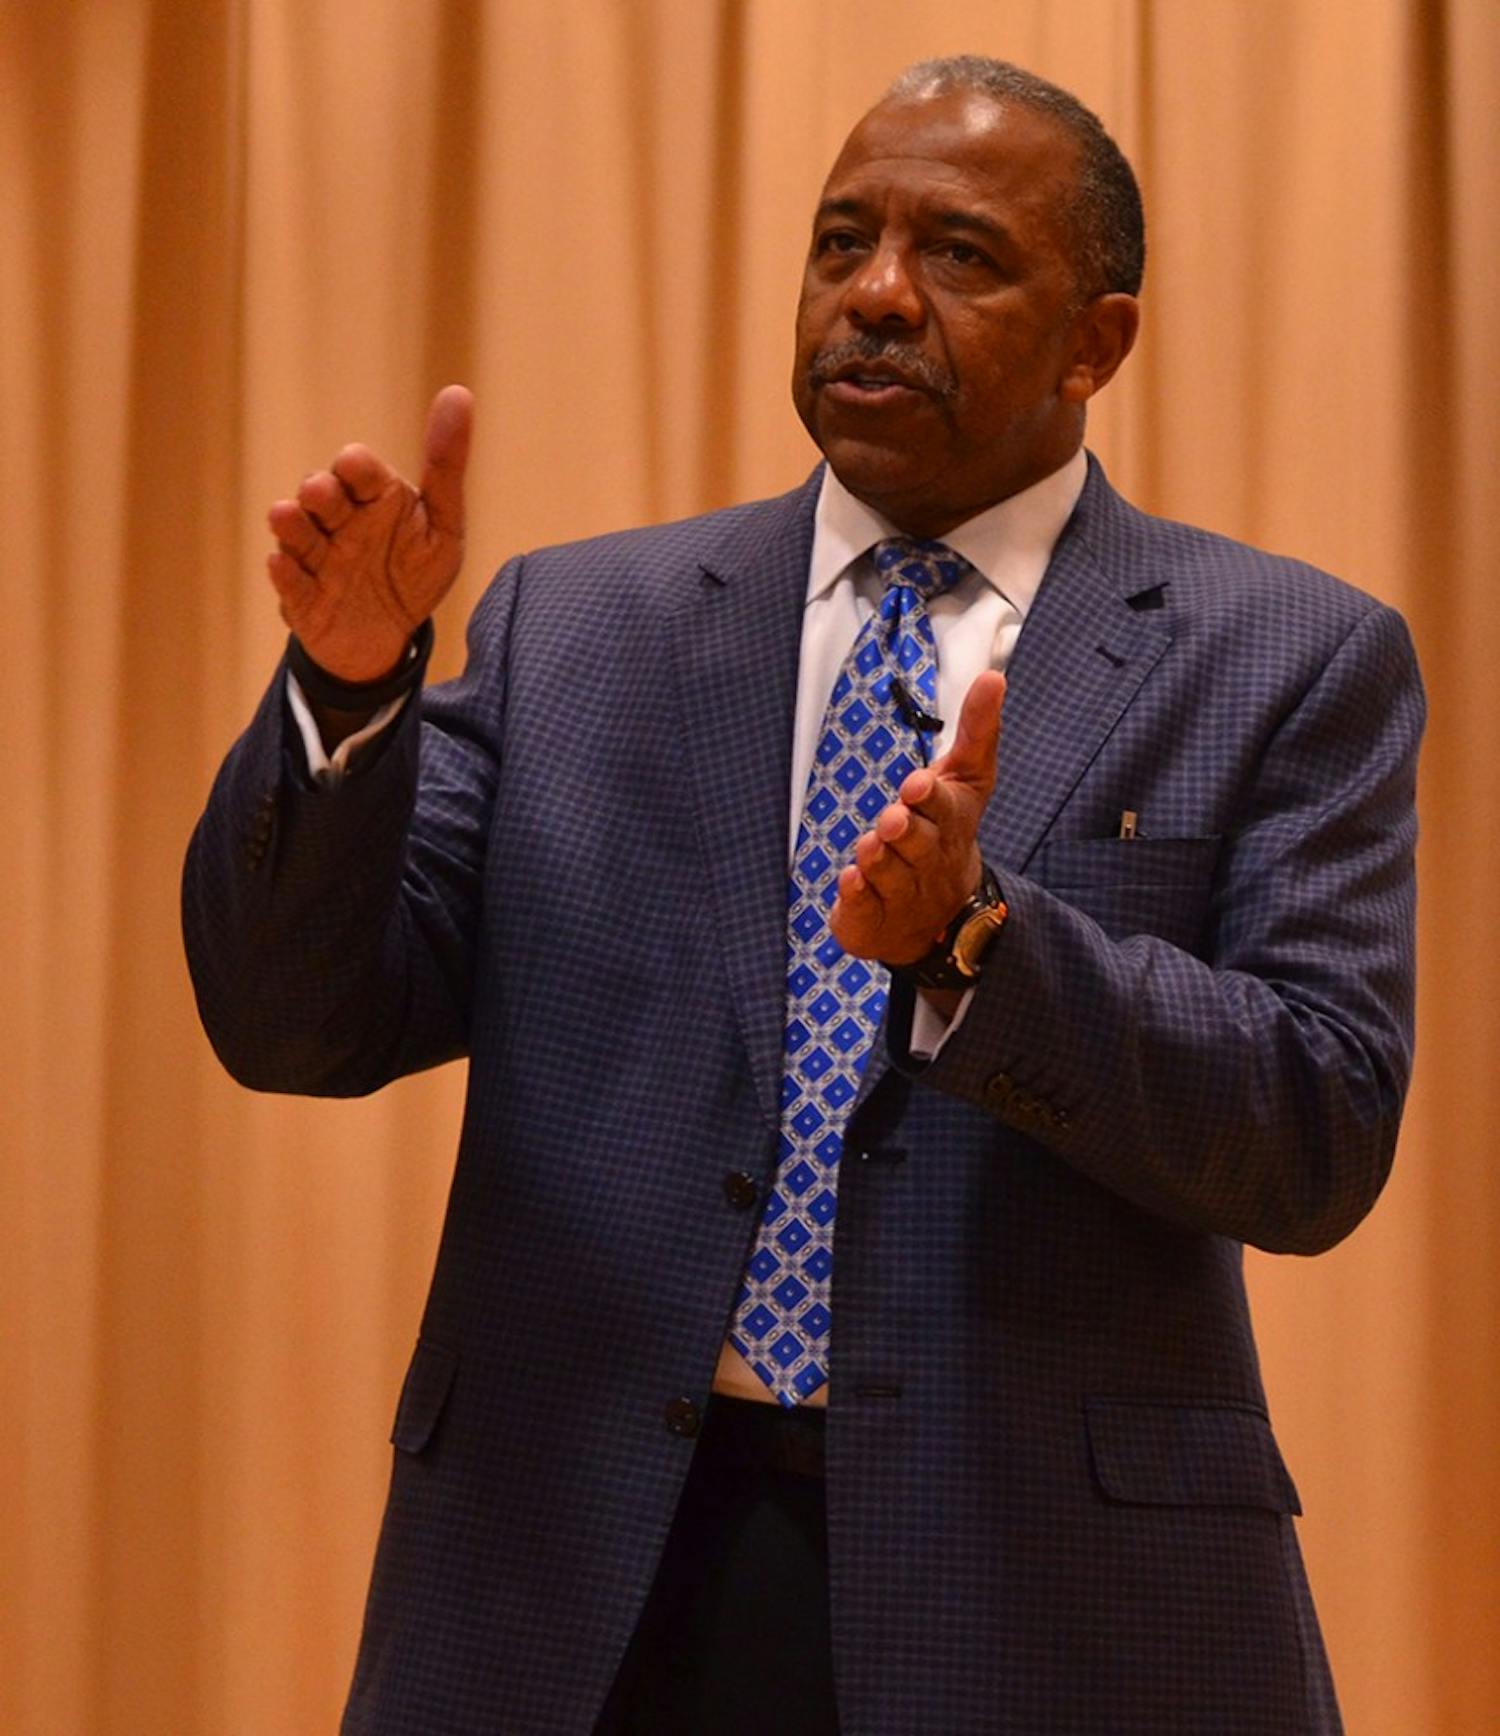 Dr. Bernard Harris Jr. spoke in front of middle and high schoolers in the Stone Center on Thursday, April 15th. Dr. Harris was the first African-American Astronaut to conduct a spacewalk and currently works for Vesalius Biocapital, a venture capital firm that invests in medical startups.